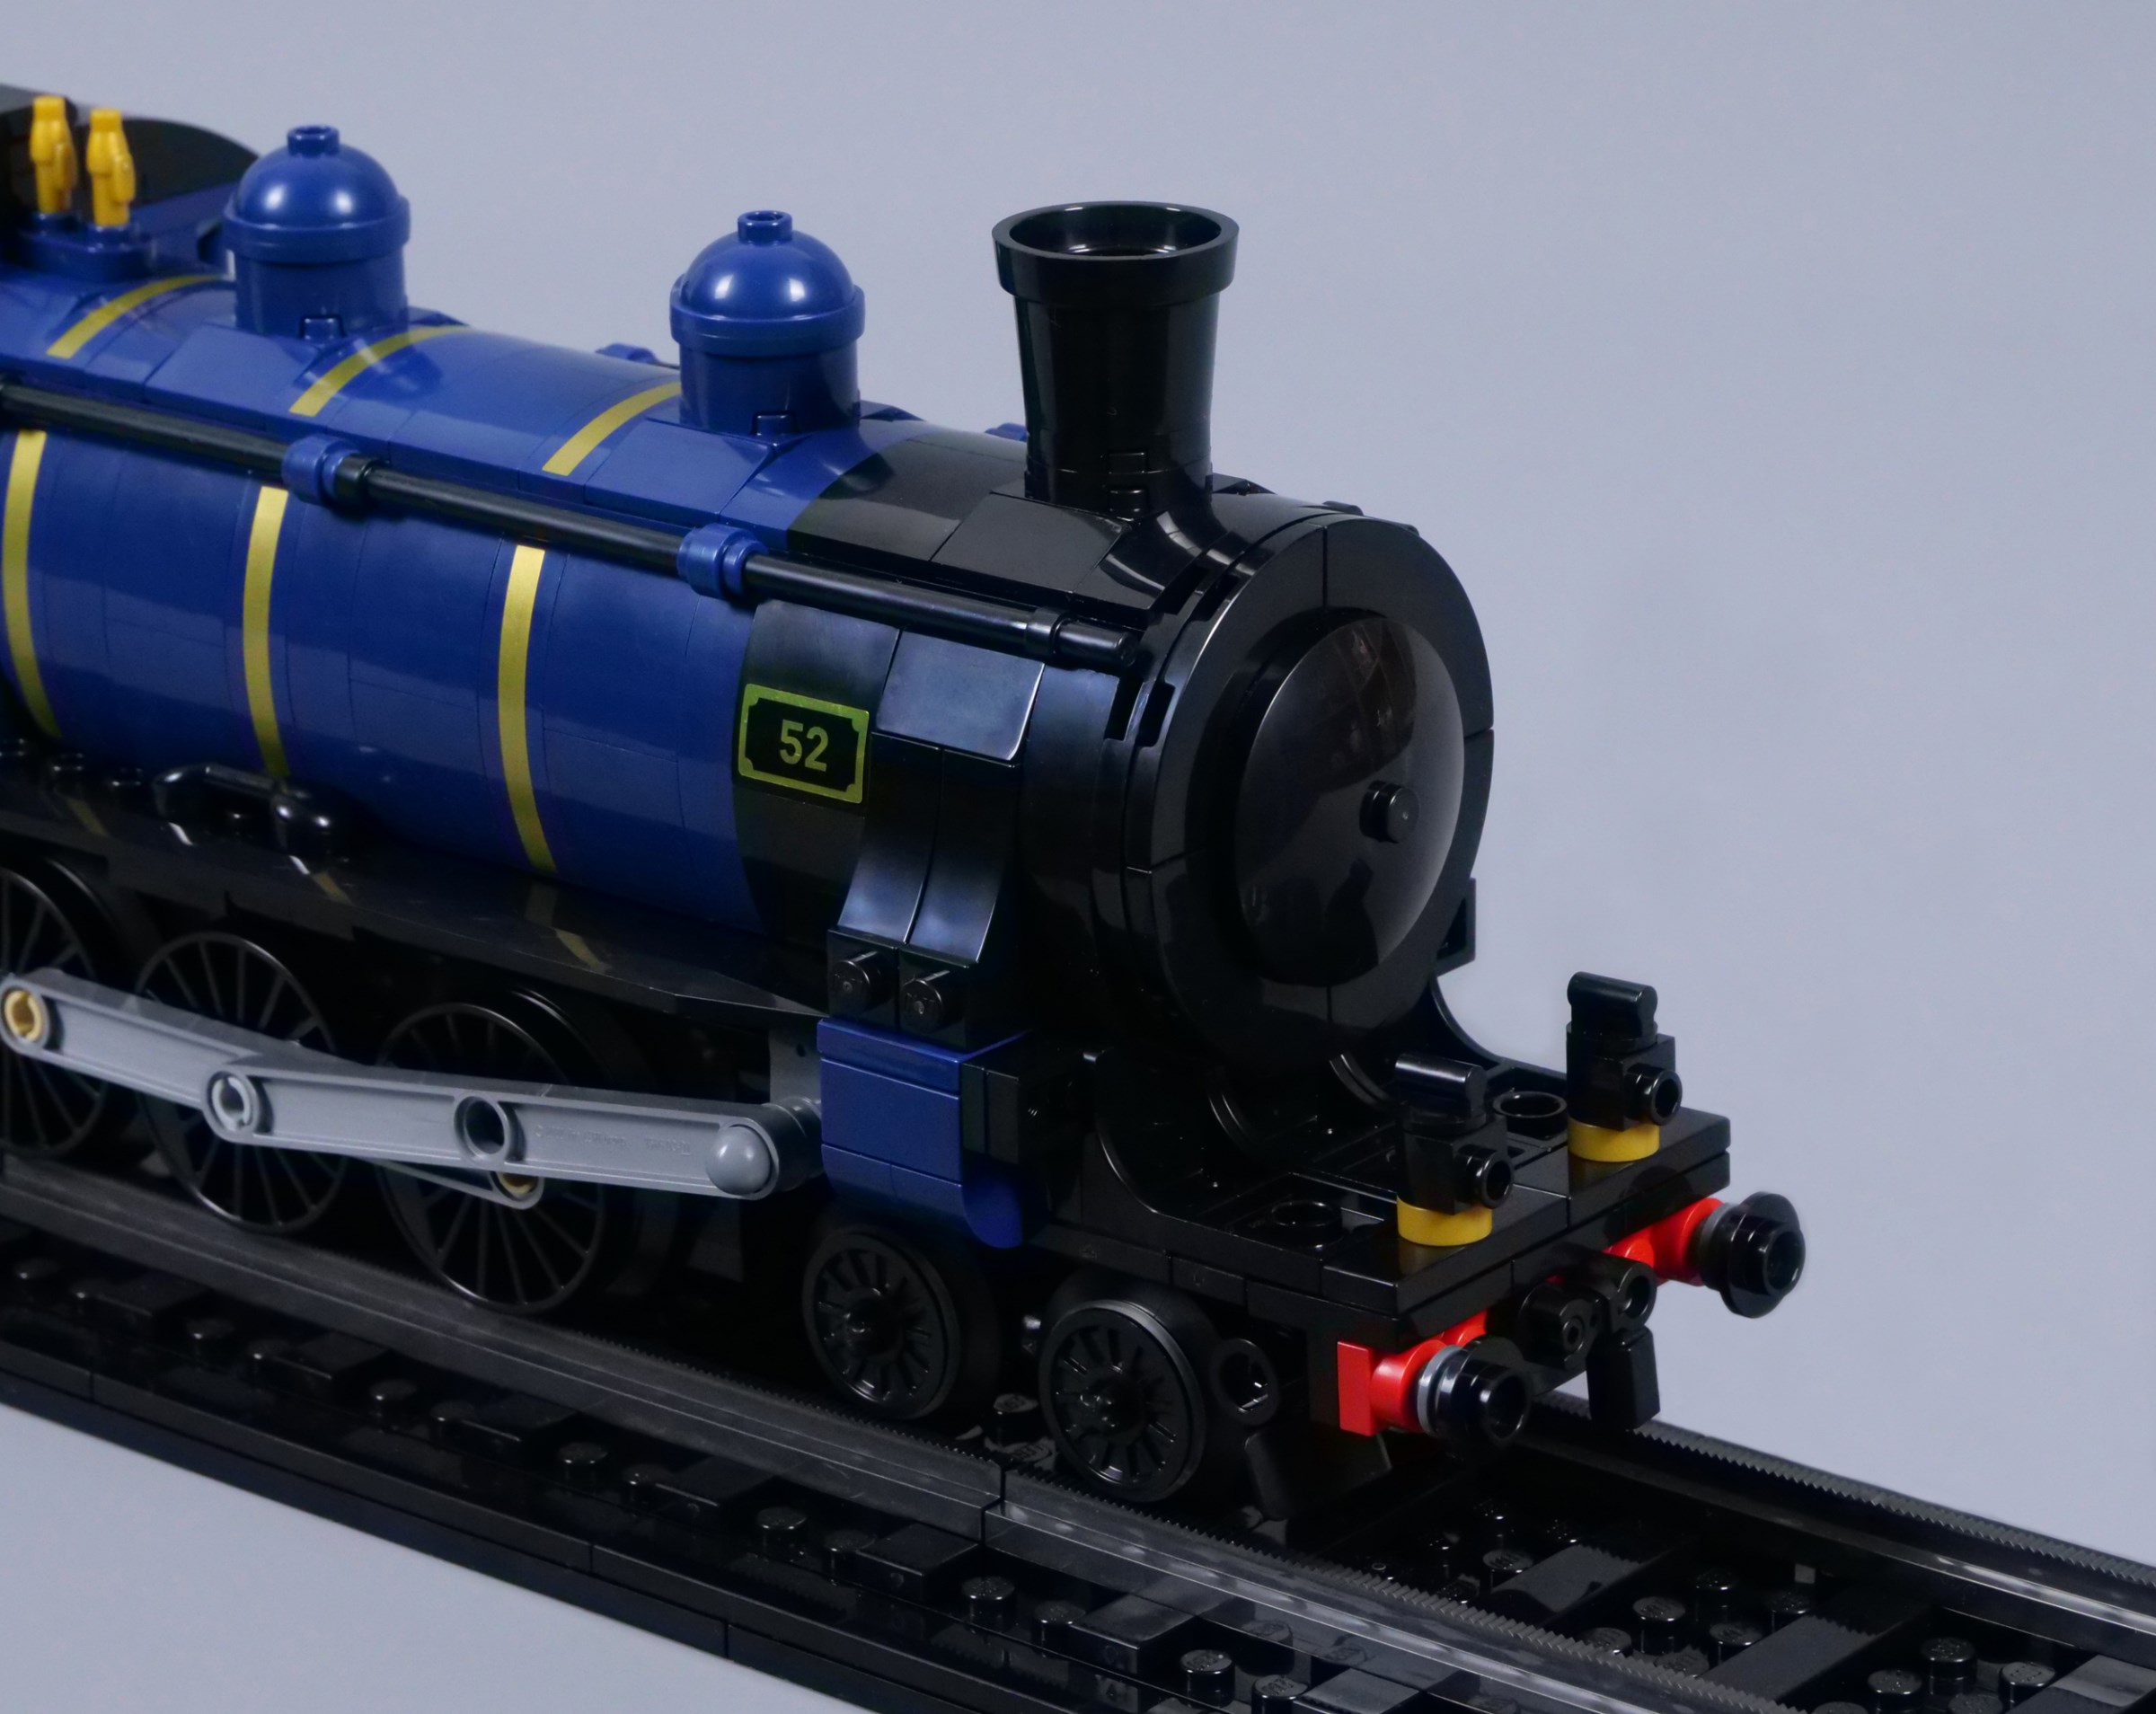 This Fan-Made LEGO Ideas Polar Express Train Is Here To Take You